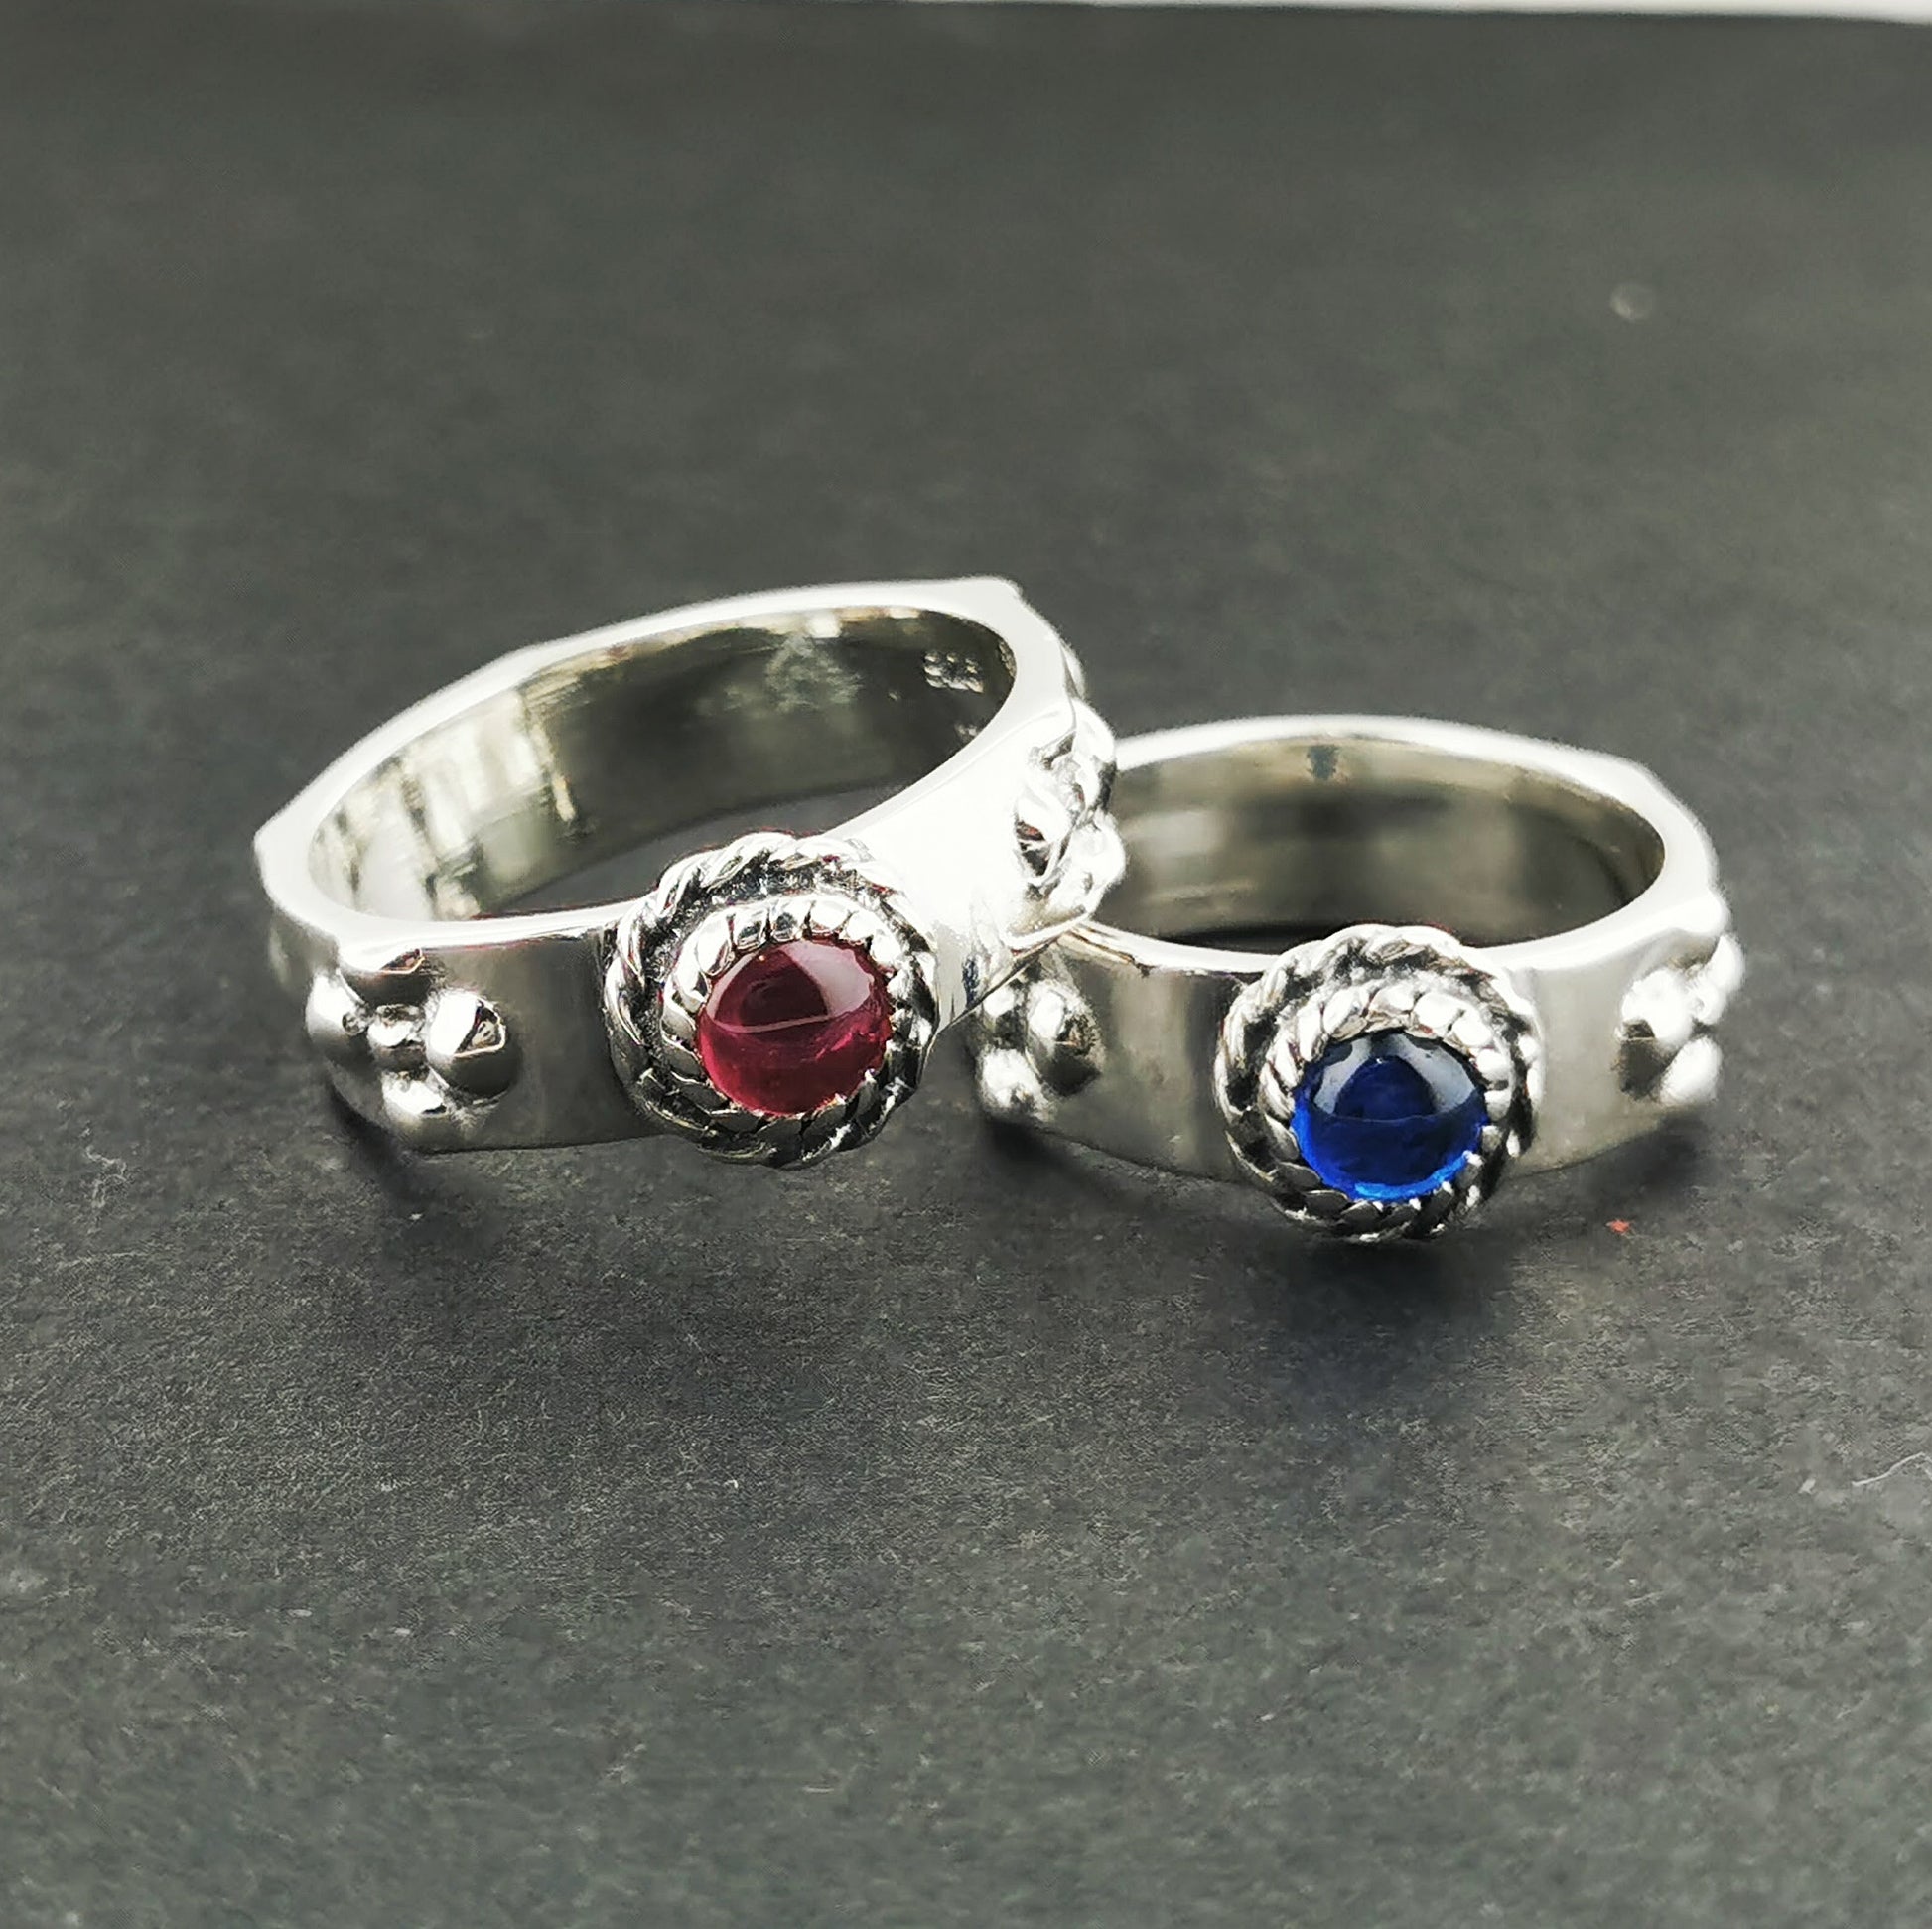 Matching Howl and Sophie Set of Two Rings in Sterling Silver, Howls Moving Castle Wedding Set, Birthstone Wedding Band Set, Couples Ring Set, How and Sophie Set, Silver Howl Ring, Howl Sophie Ring, Birthstone Ring Set, Howls Wedding Set, Matching Howl and Sophie Rings in Sterling Silver with Cabochon Birthstones